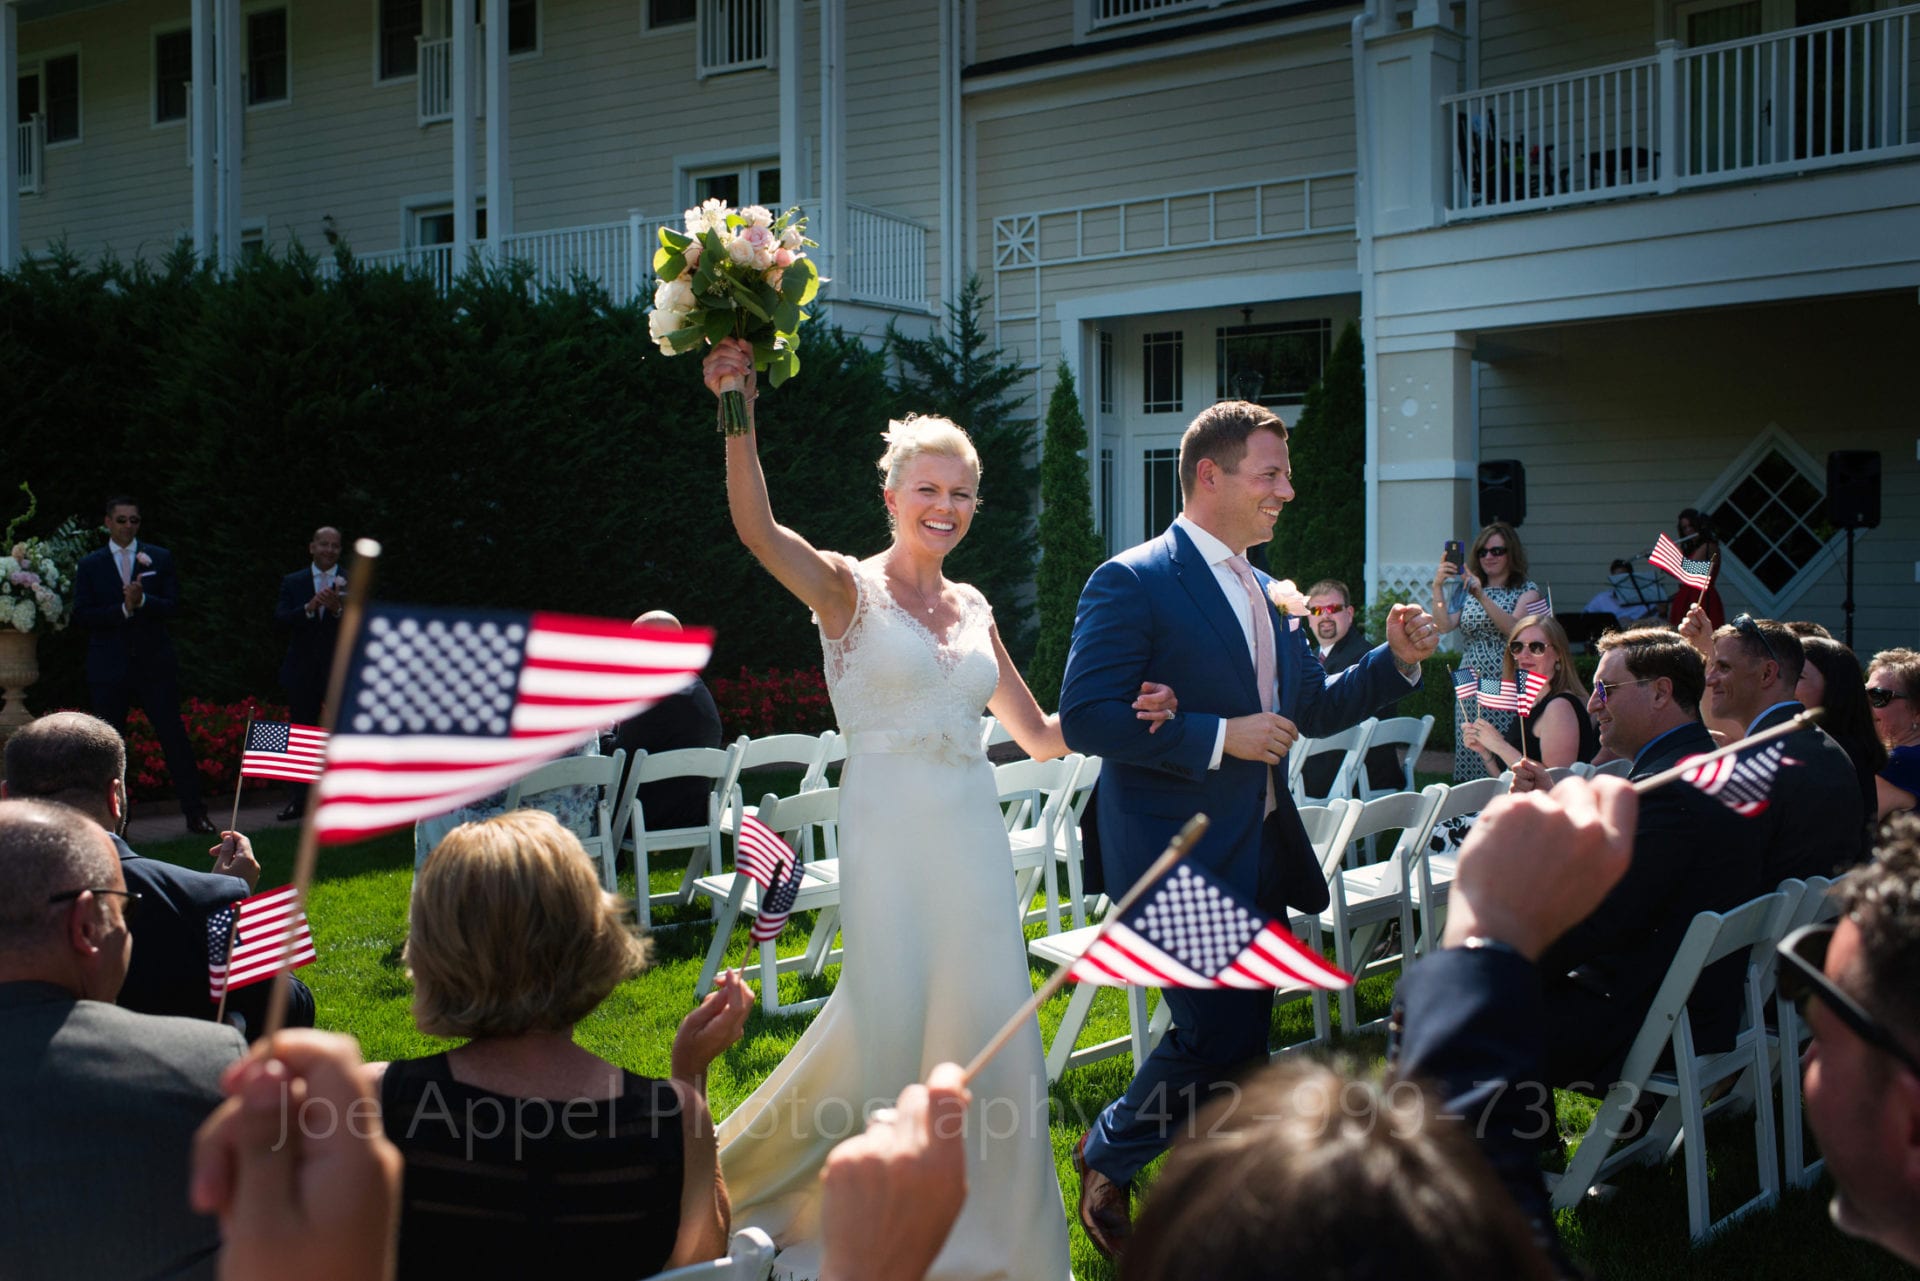 American flags wave as a bride and groom walk down the aisle at the end of their wedding ceremony. The bride raises her bouquet in the air and the groom pumps his fist during their Omni Bedford Springs Resort Wedding.